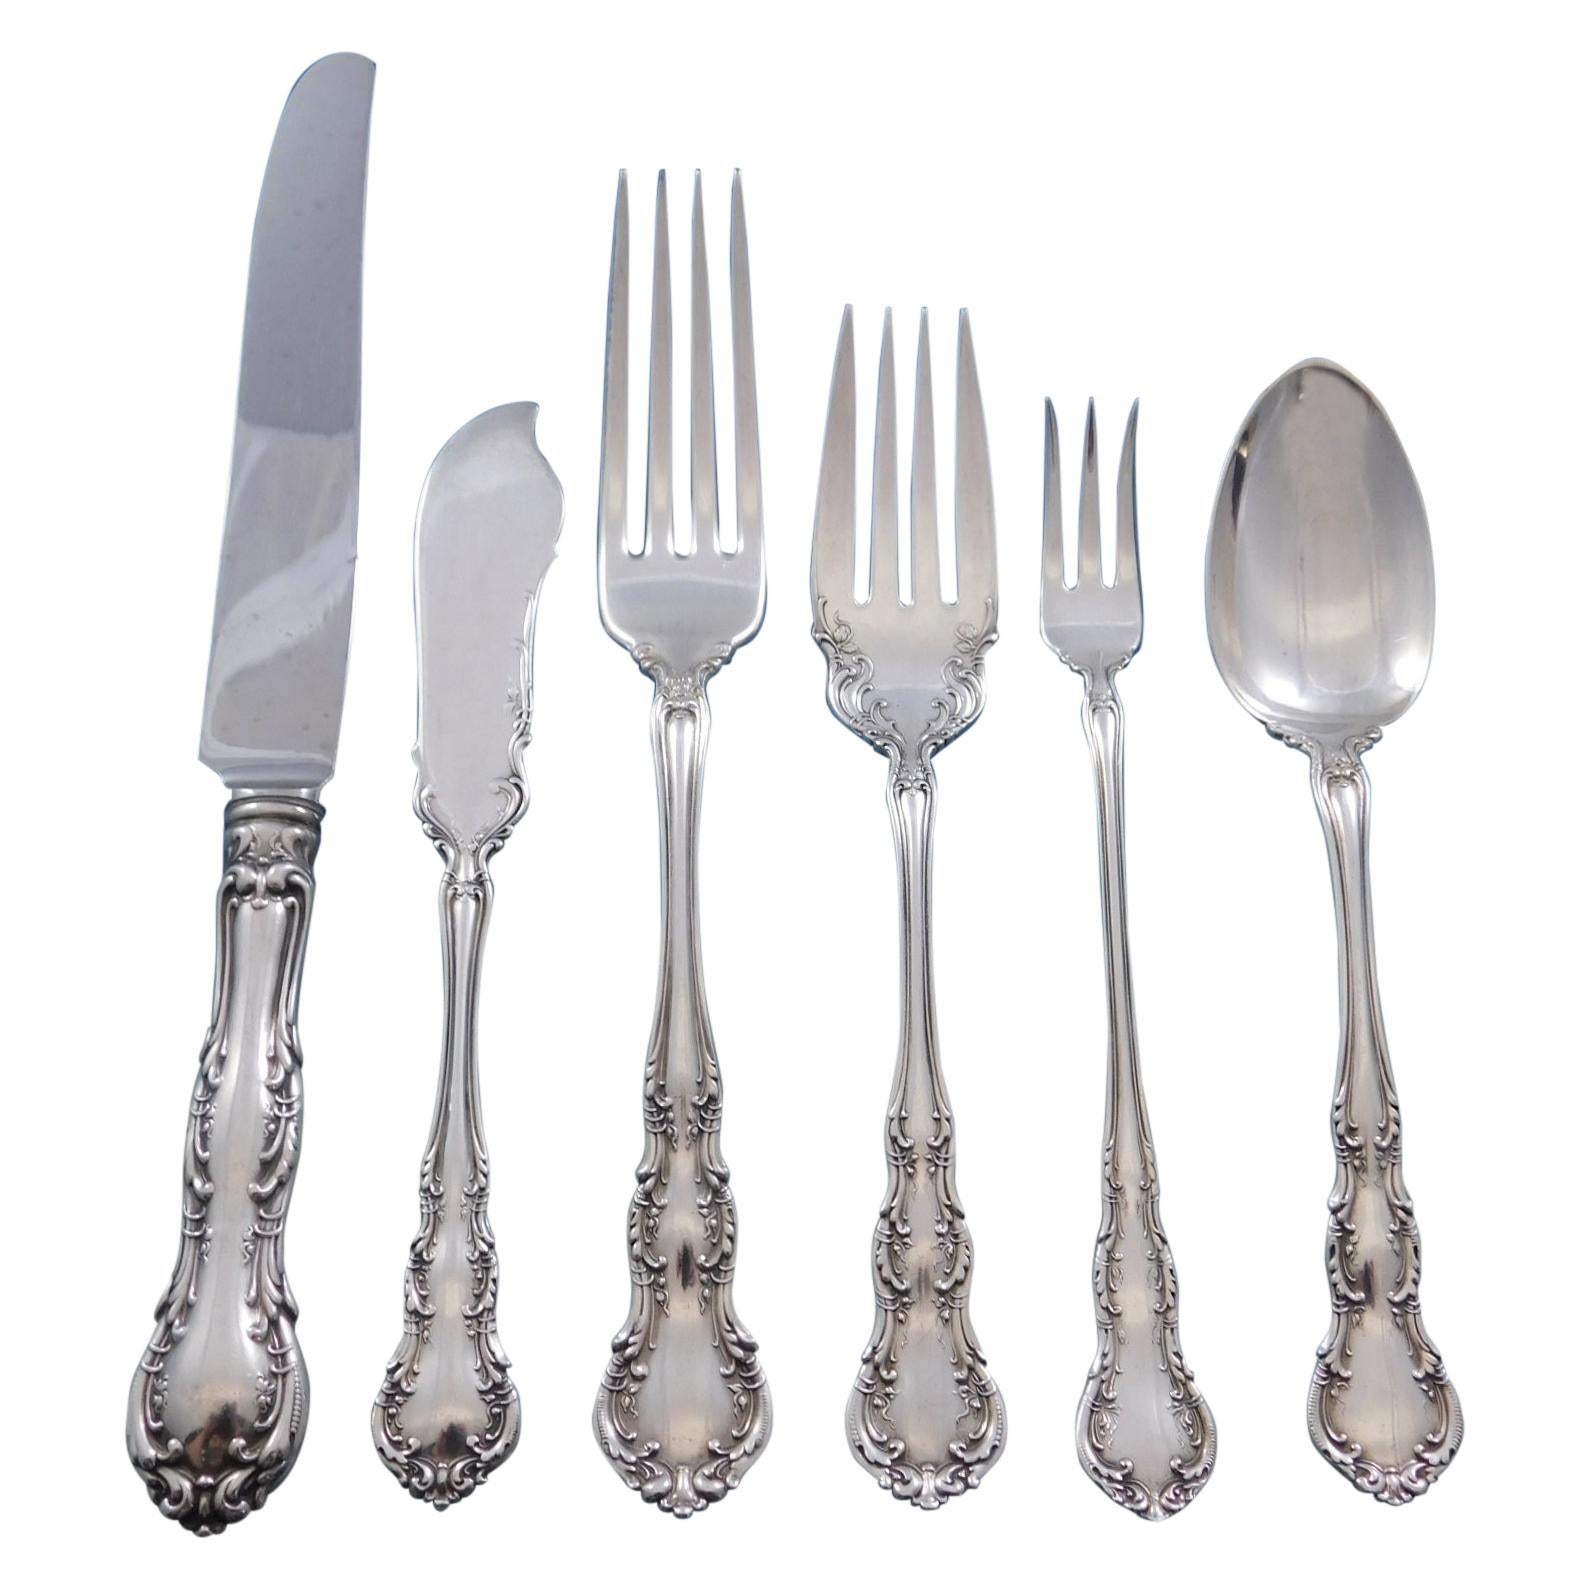 Old Atlanta Irving by Wallace Sterling Silver Flatware Set for 8 Service 50 pcs